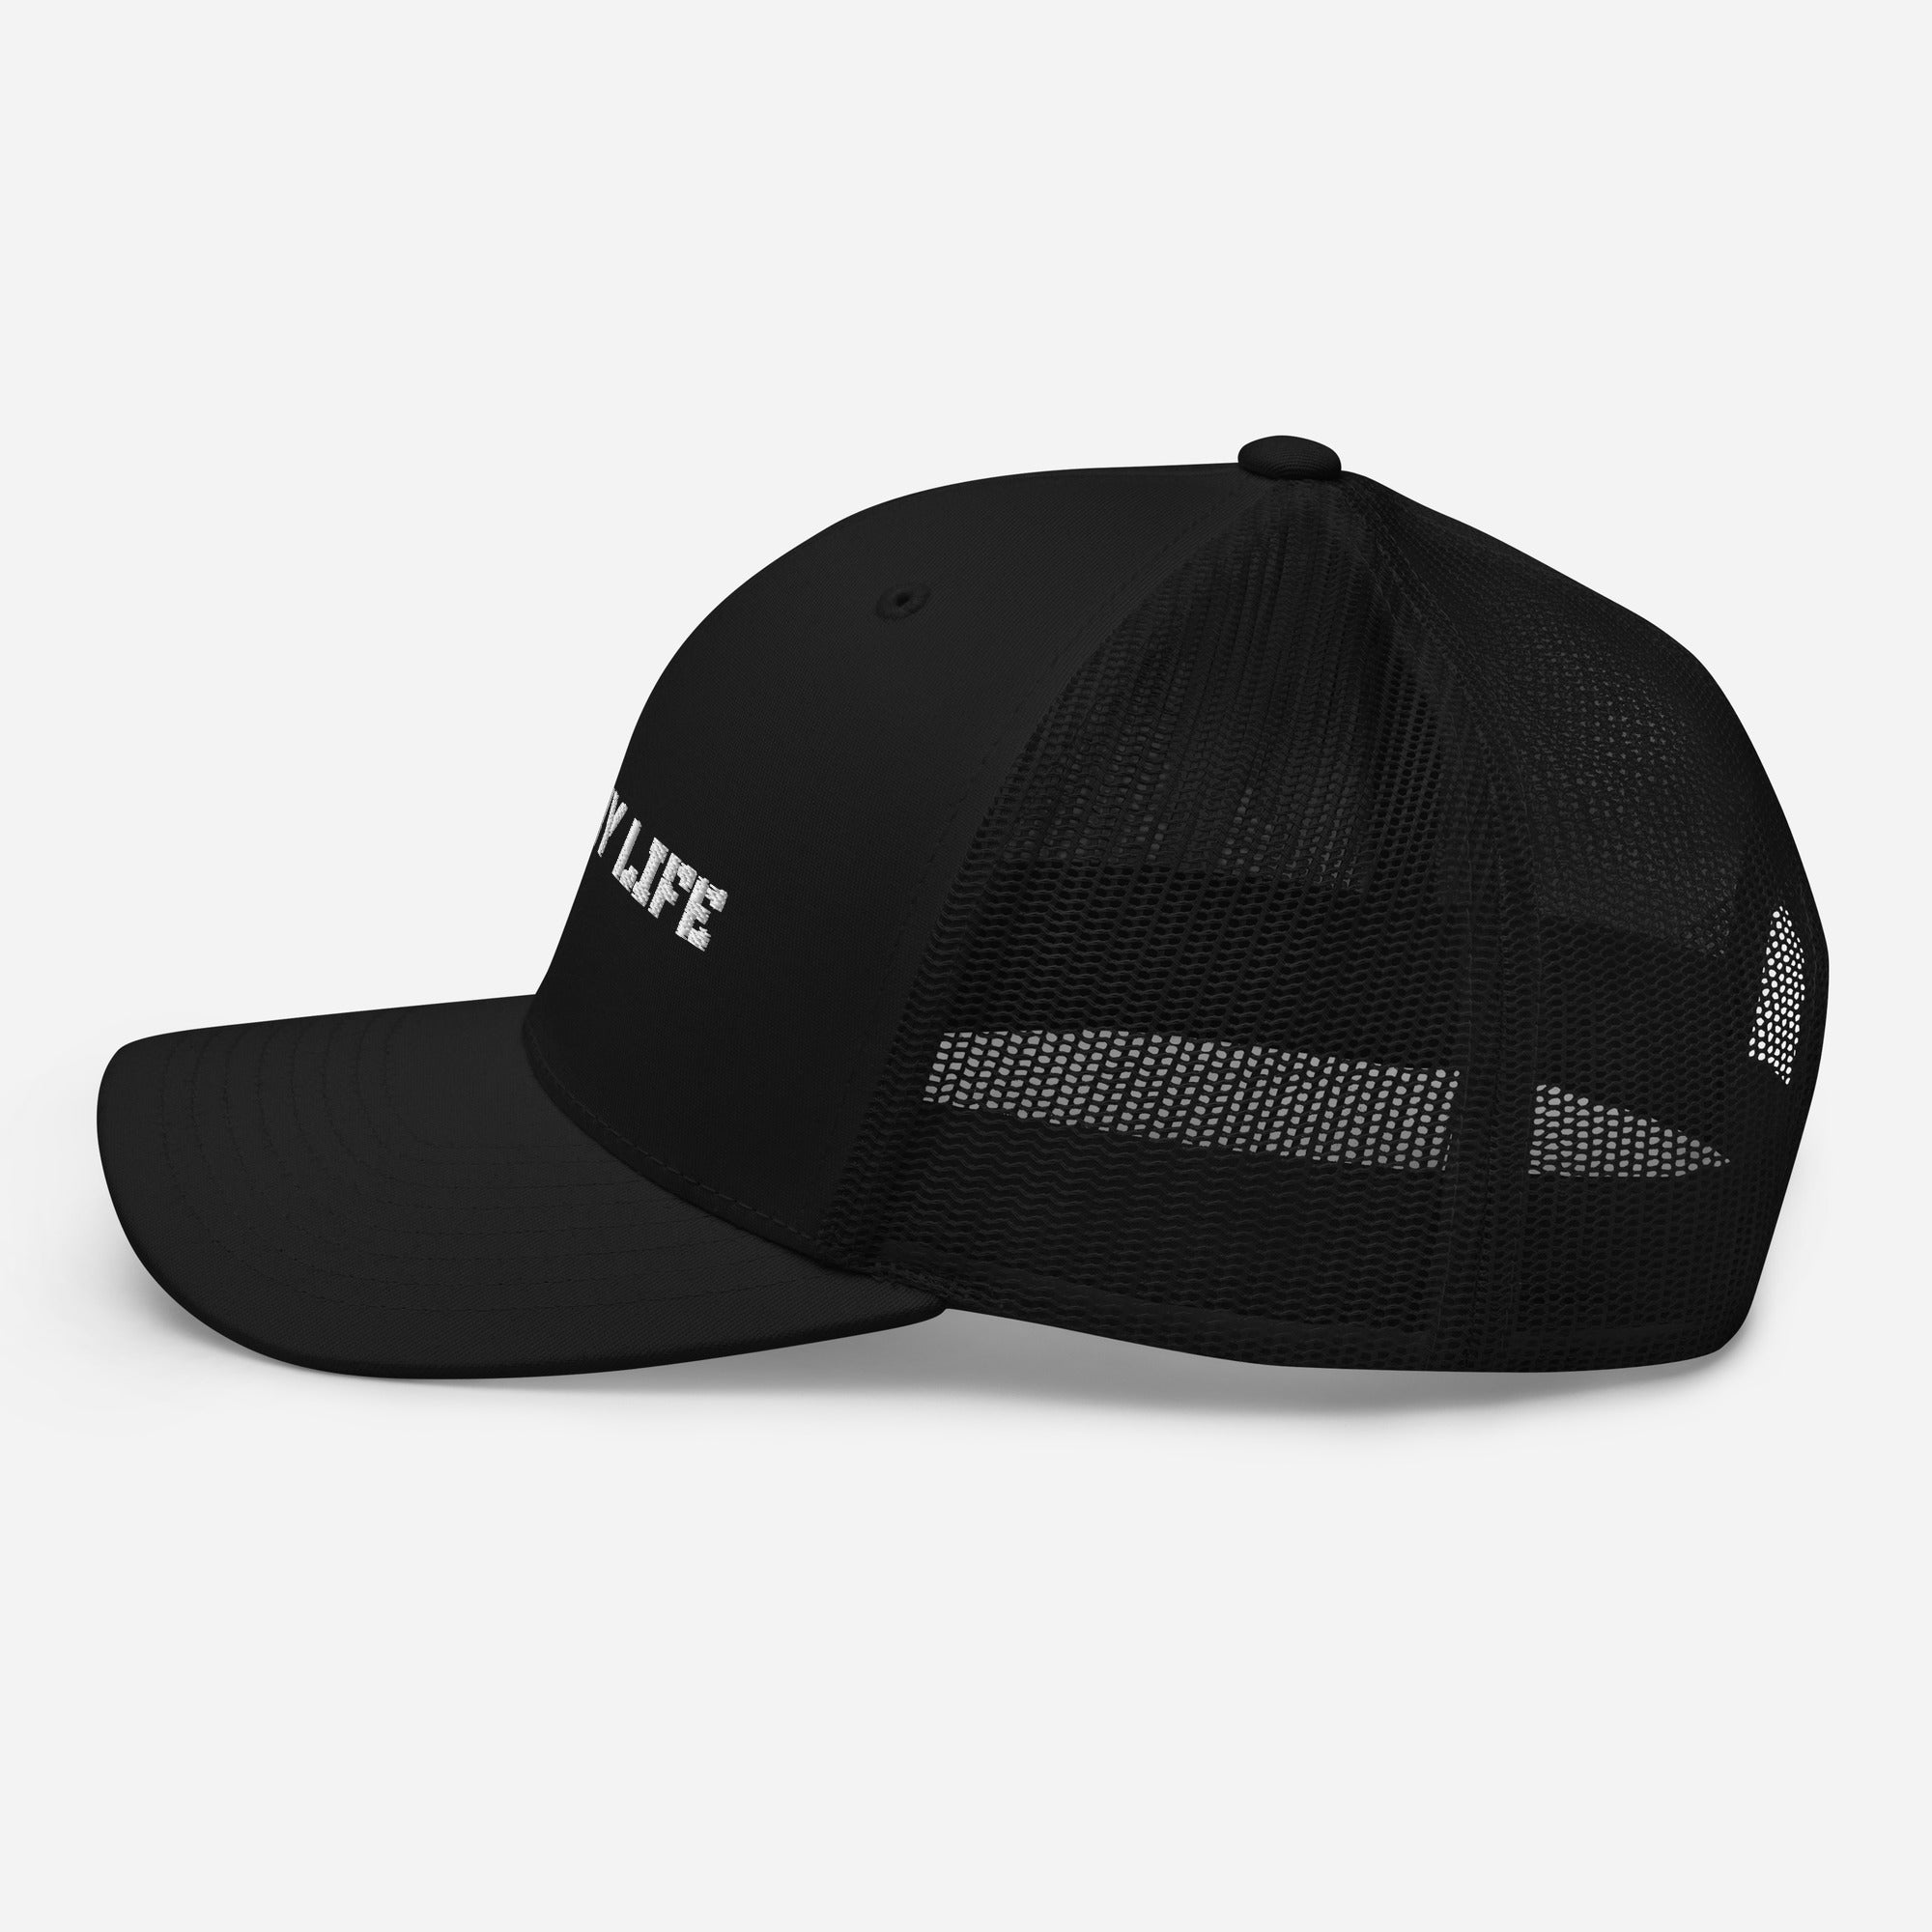 MB “It’s my life” embroidered Trucker cap